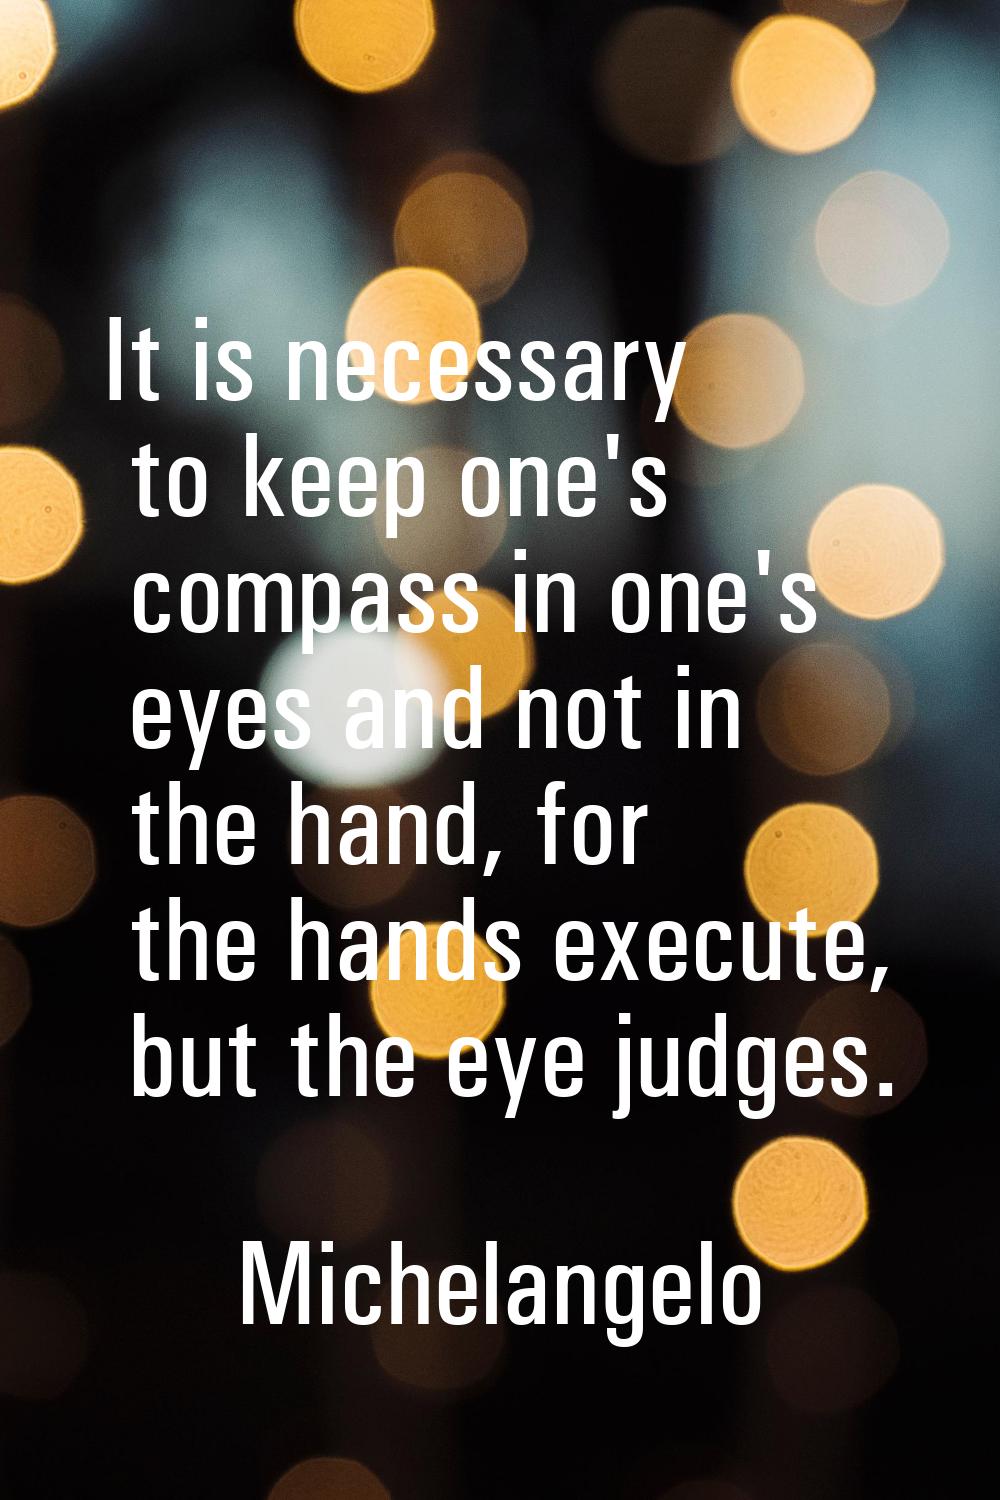 It is necessary to keep one's compass in one's eyes and not in the hand, for the hands execute, but